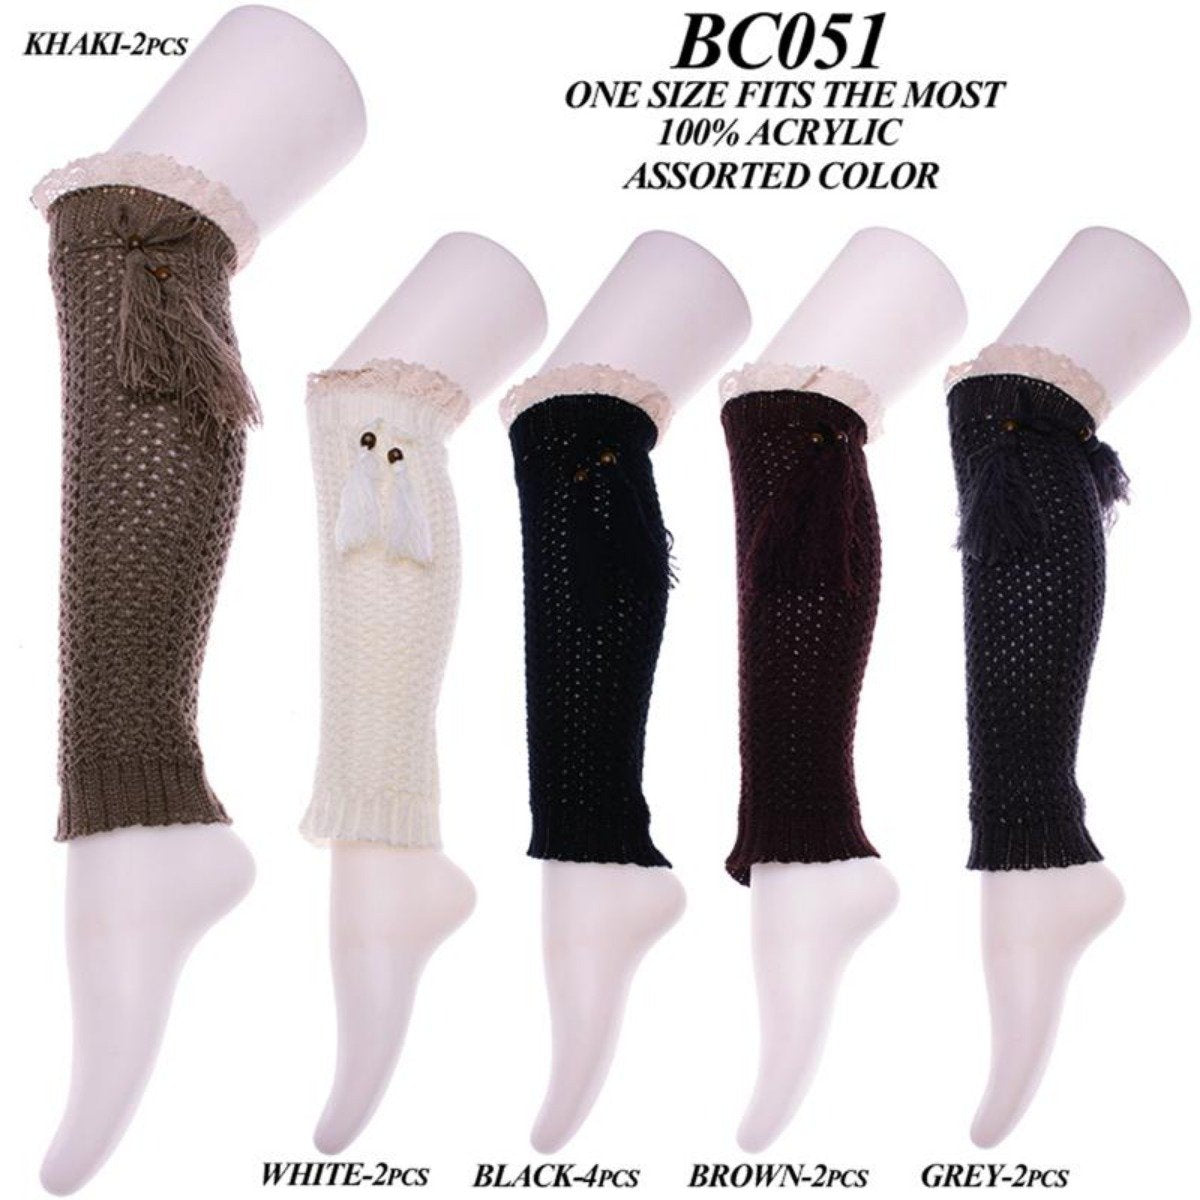 Solid Color Knee-High Knitted Boot Cuffs W/ Tassels & Lace Trim - 12Pc Set